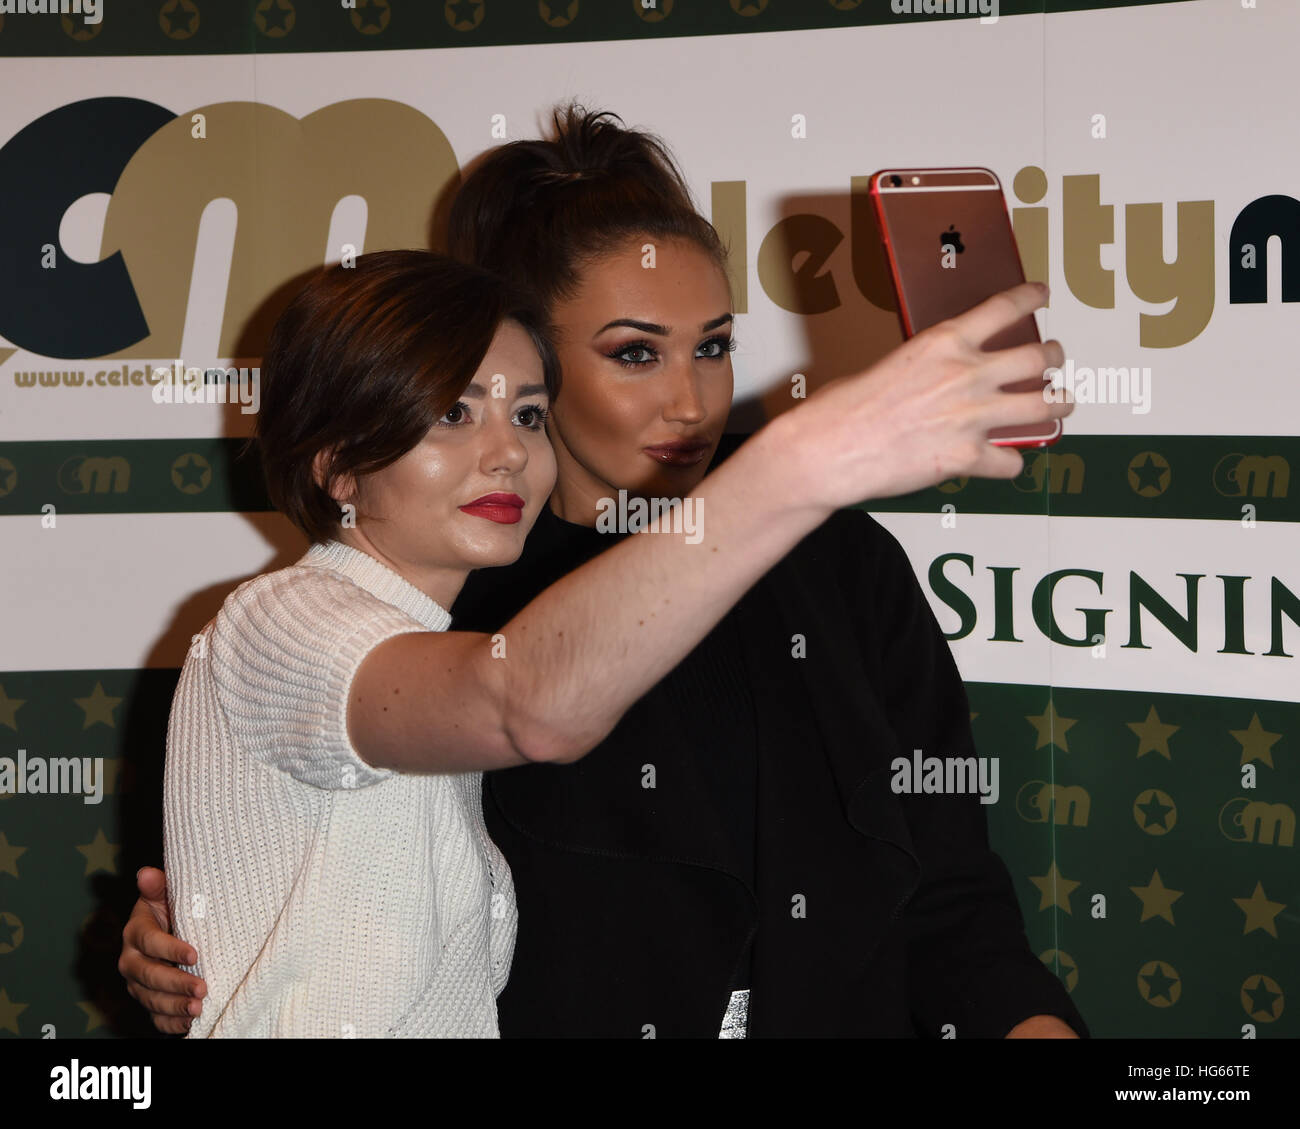 Megan McKenna and Charlotte Crosby signing copies of their calendars at The Clothes Show Live 2016 in Birmingham  Featuring: Megan McKenna Where: Birmingham, United Kingdom When: 05 Dec 2016 Stock Photo